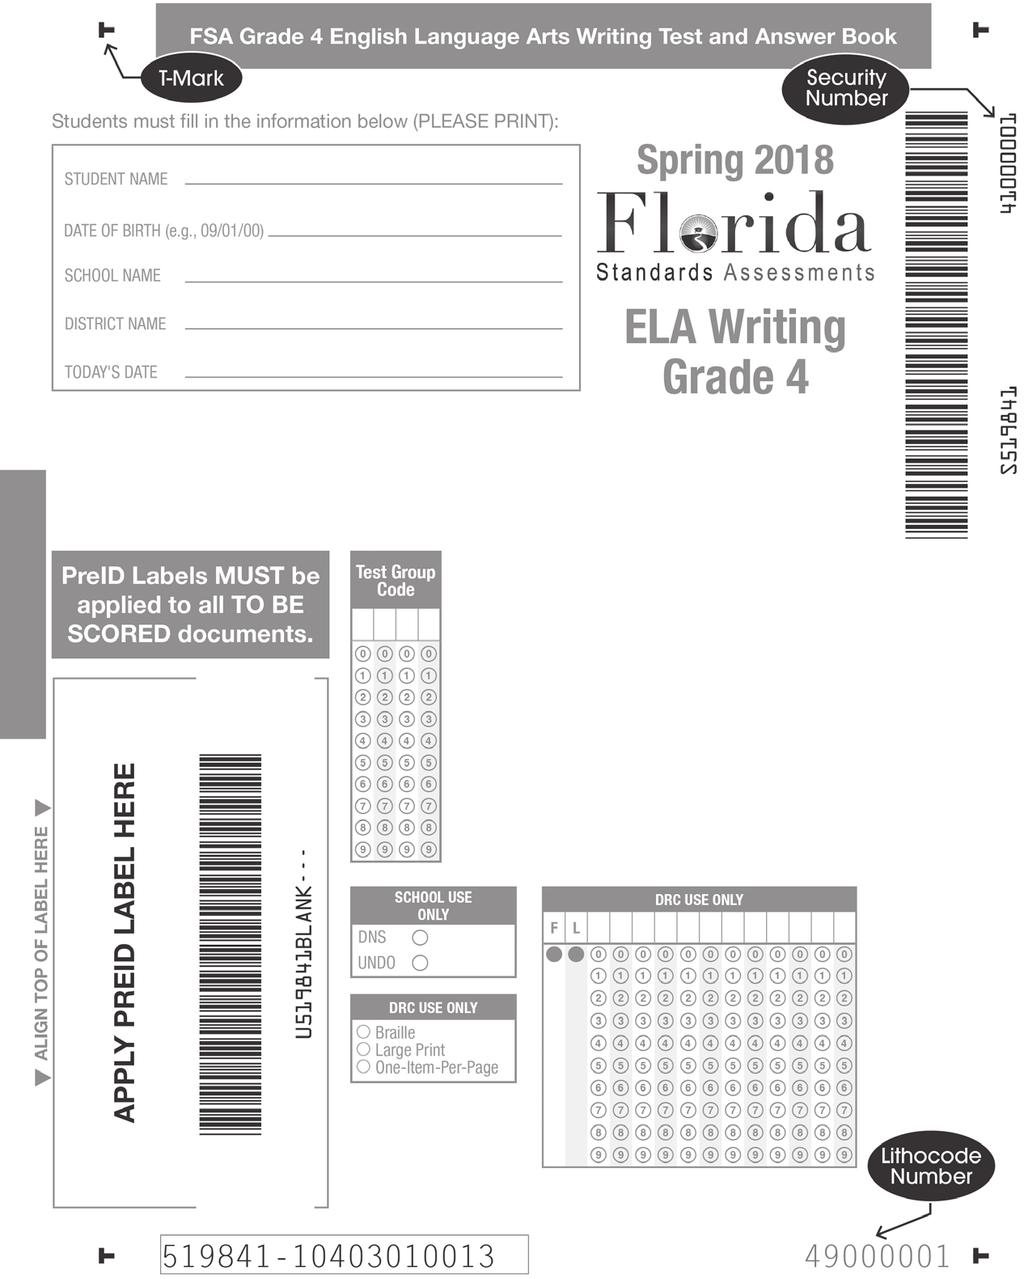 Directions for Returning Typed FSA ELA Writing Responses Directions for Returning Typed FSA ELA Writing Responses These instructions may be used to return typed responses for students taking a